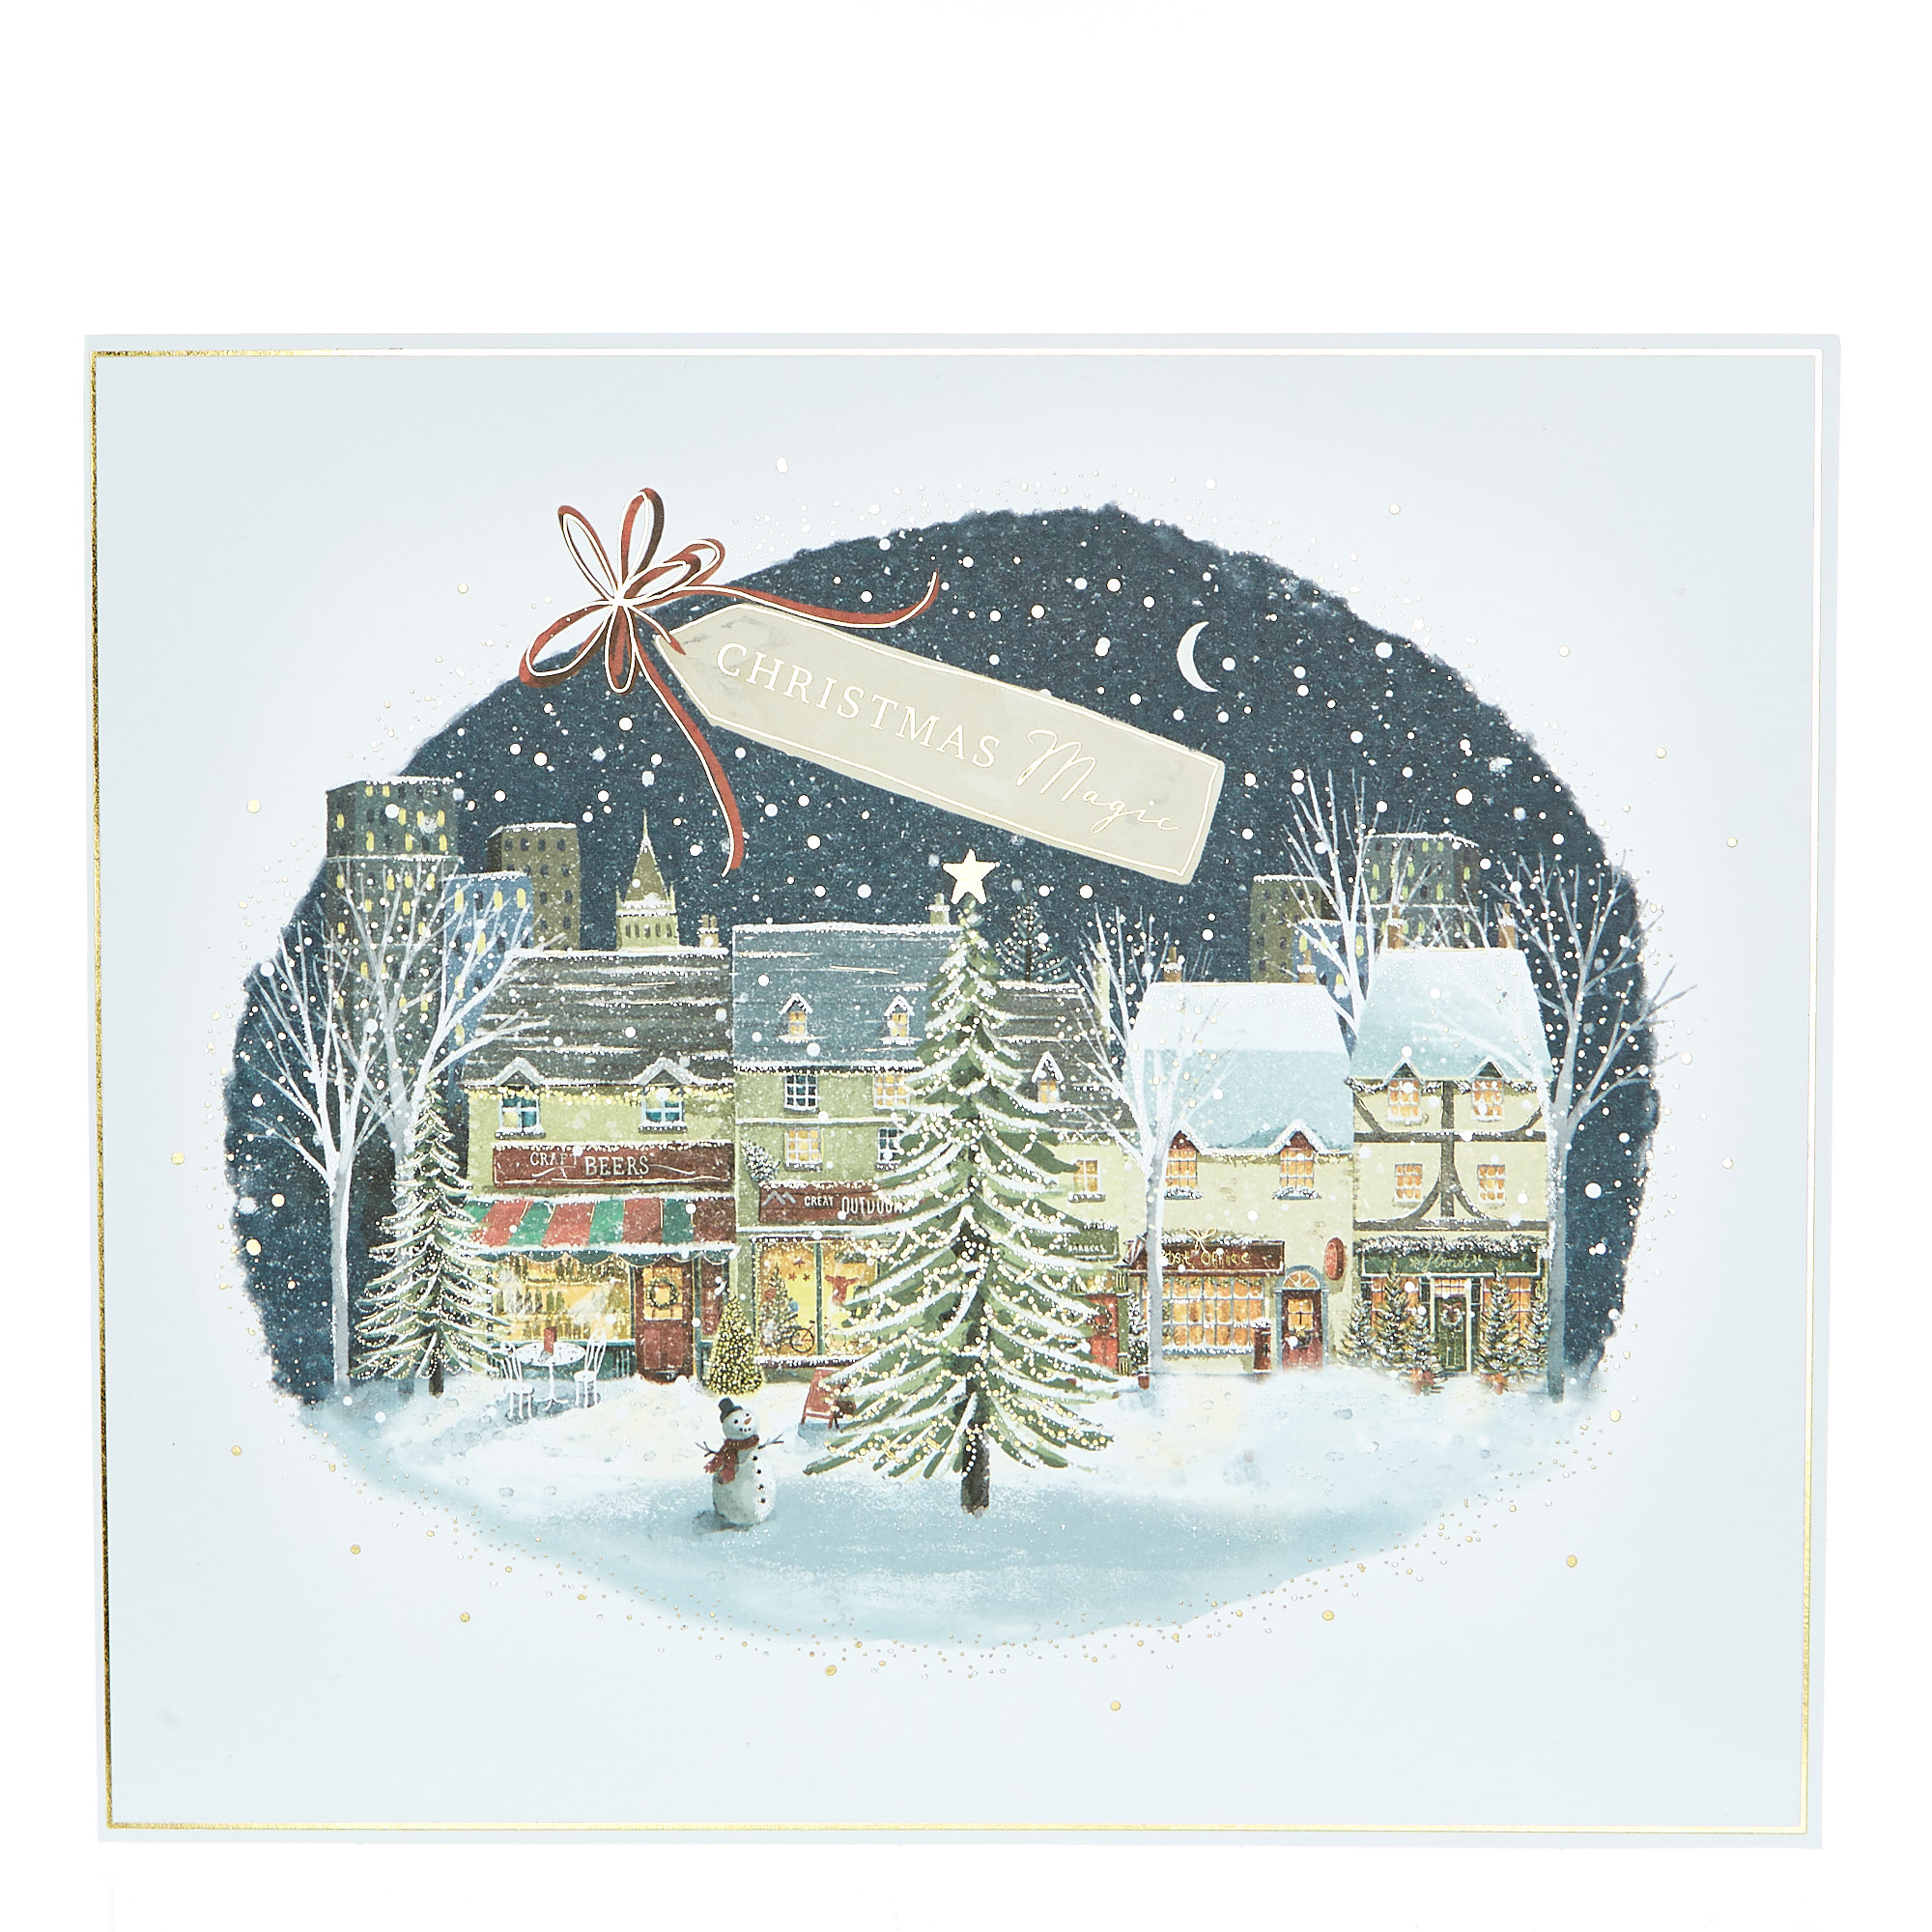 Buy Box of 12 Deluxe Village Scene Charity Christmas Cards - 2 Designs for GBP 3.99 | Card ...